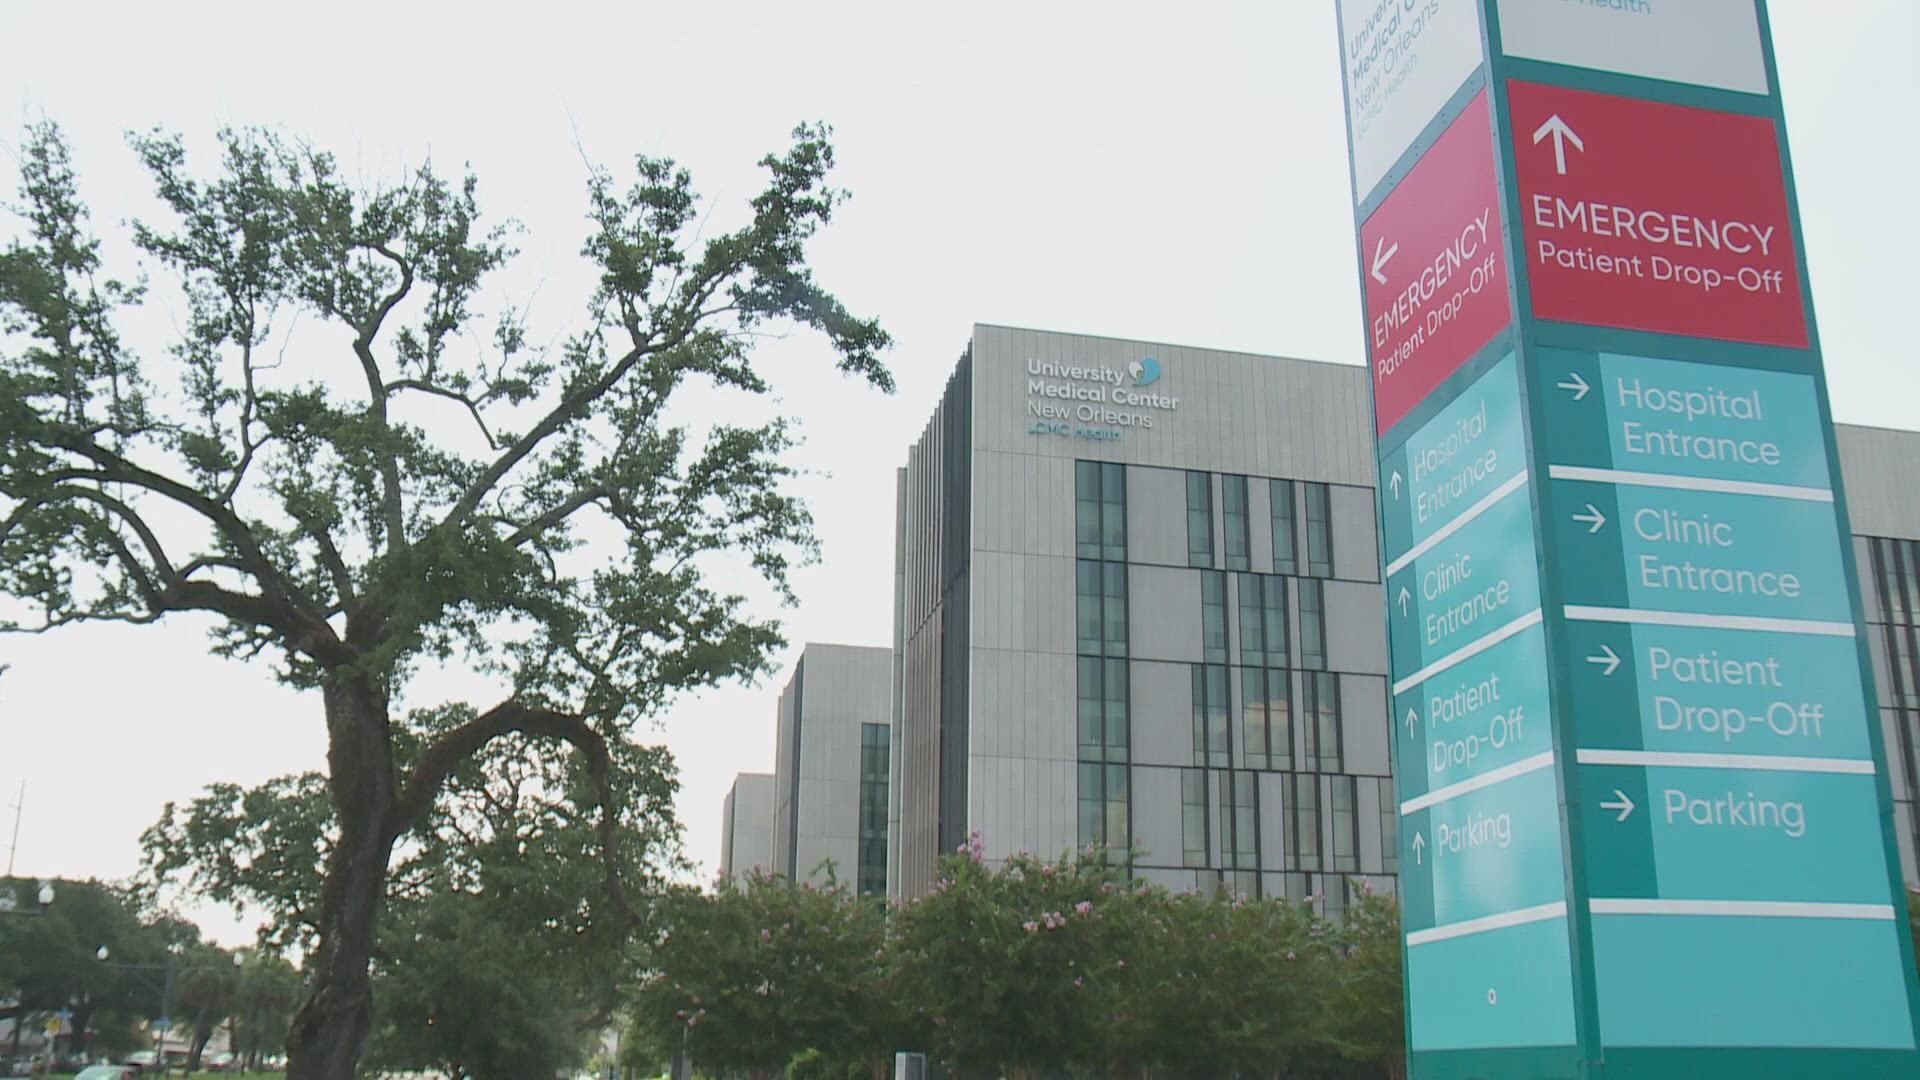 As part of the acquisition, the majority of the services at Tulane's downtown hospital will move to East Jefferson General Hospital and University Medical Center.